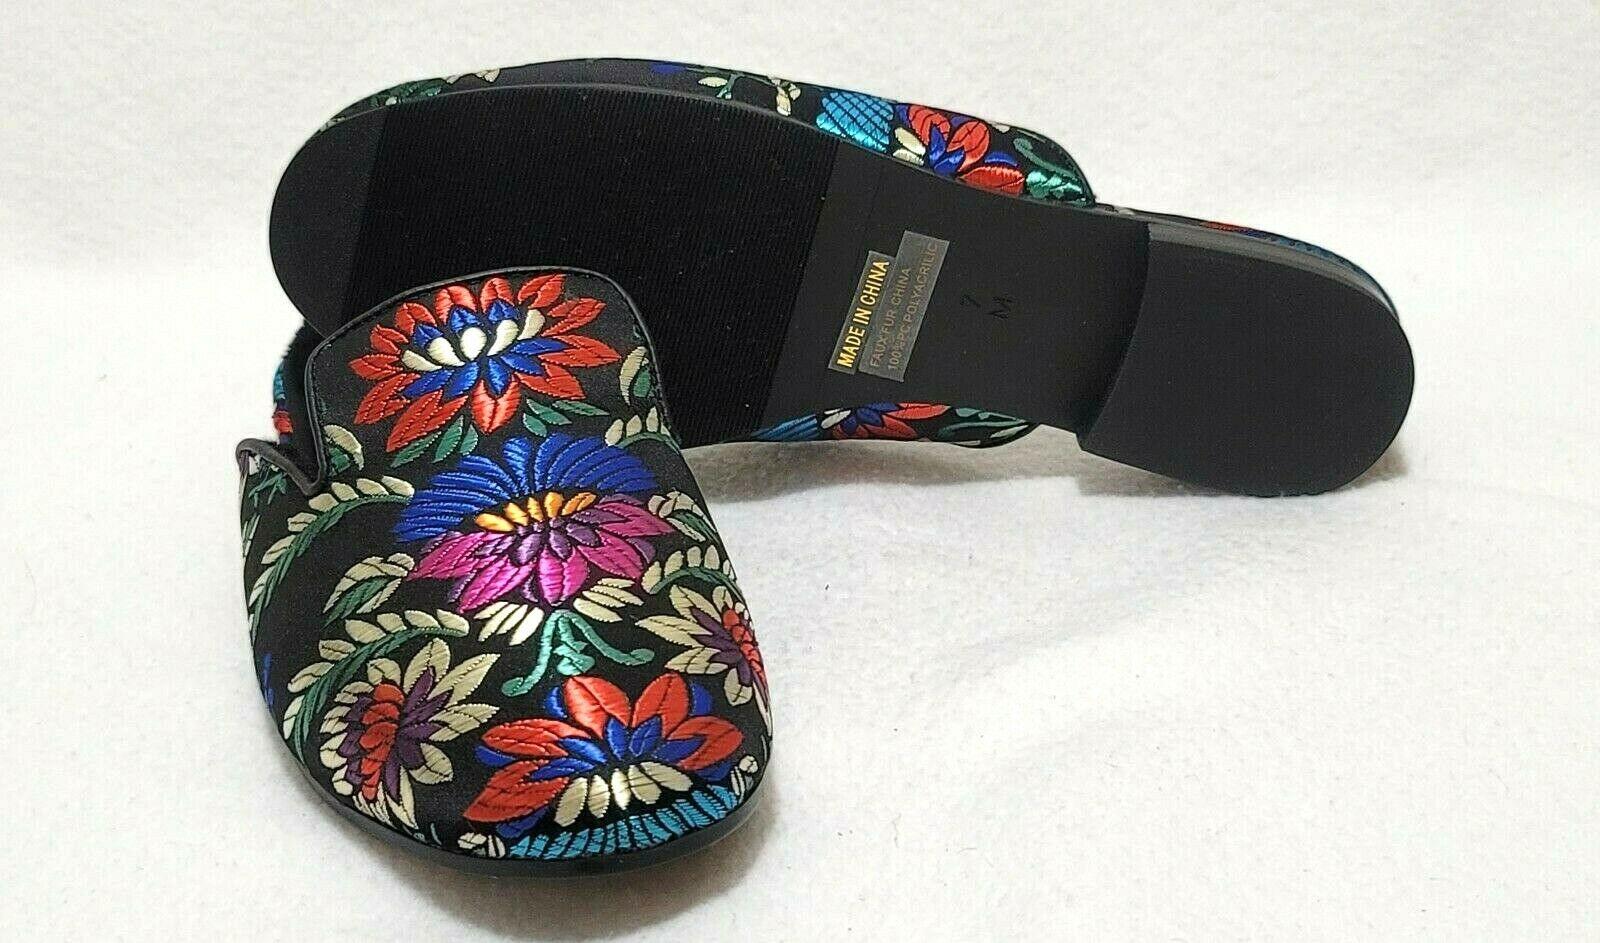 VANELi Waylin Women's Mule Jaquy Fabric Black Embroidered Flowers Shoes US 7 M - SVNYFancy